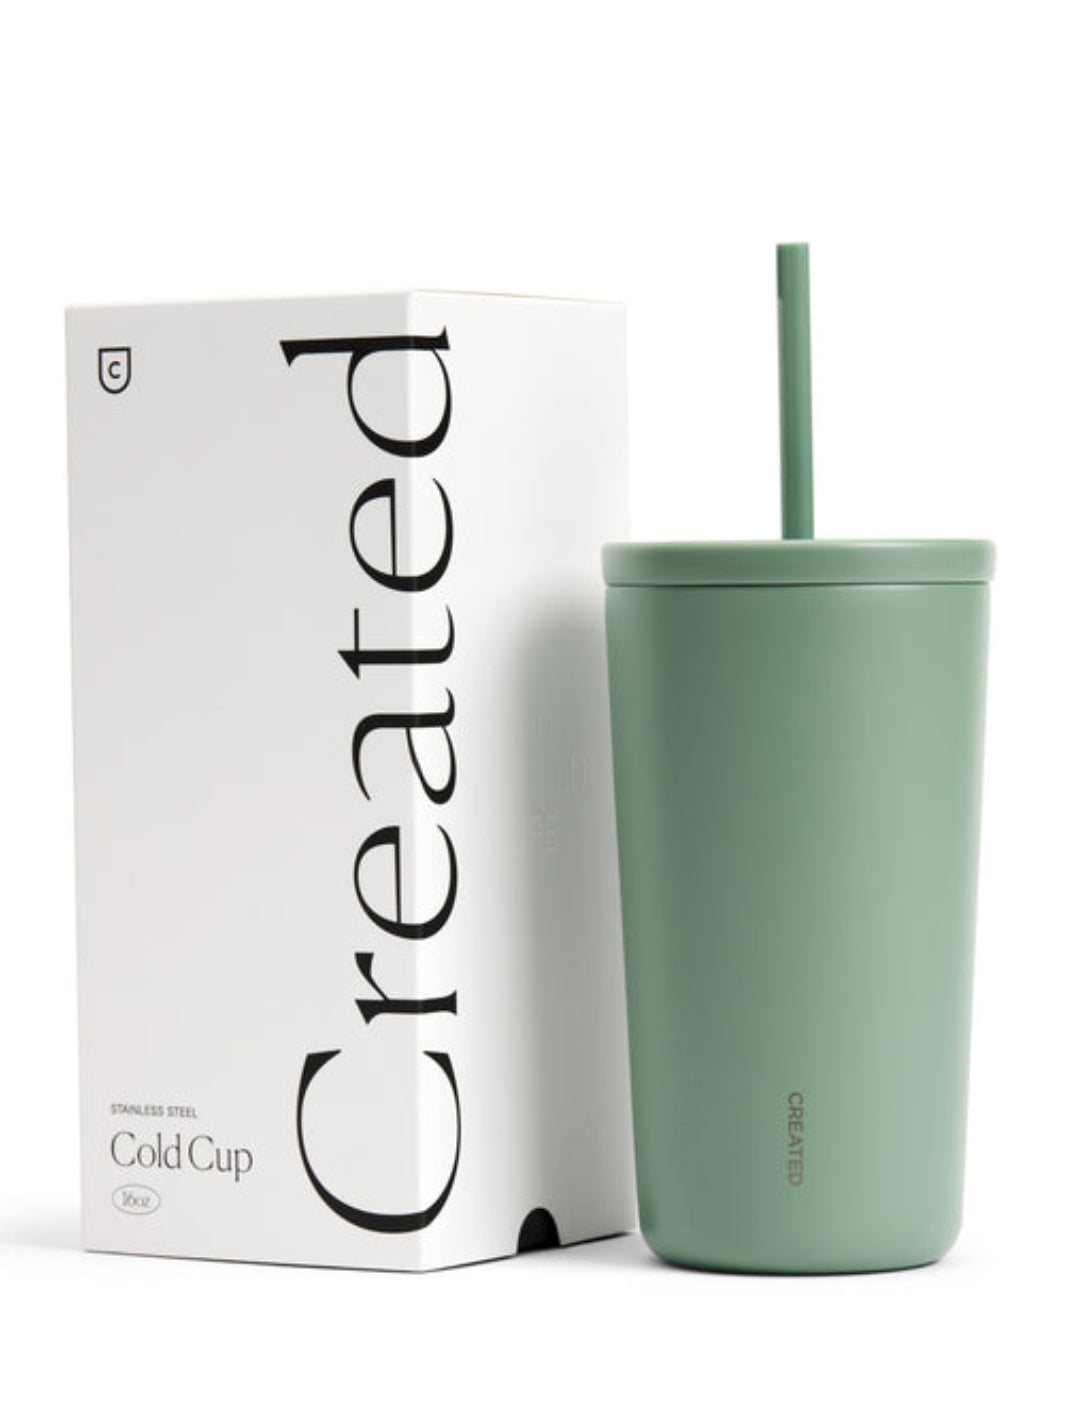 CREATED CO. Cold Cup (16oz/454ml)